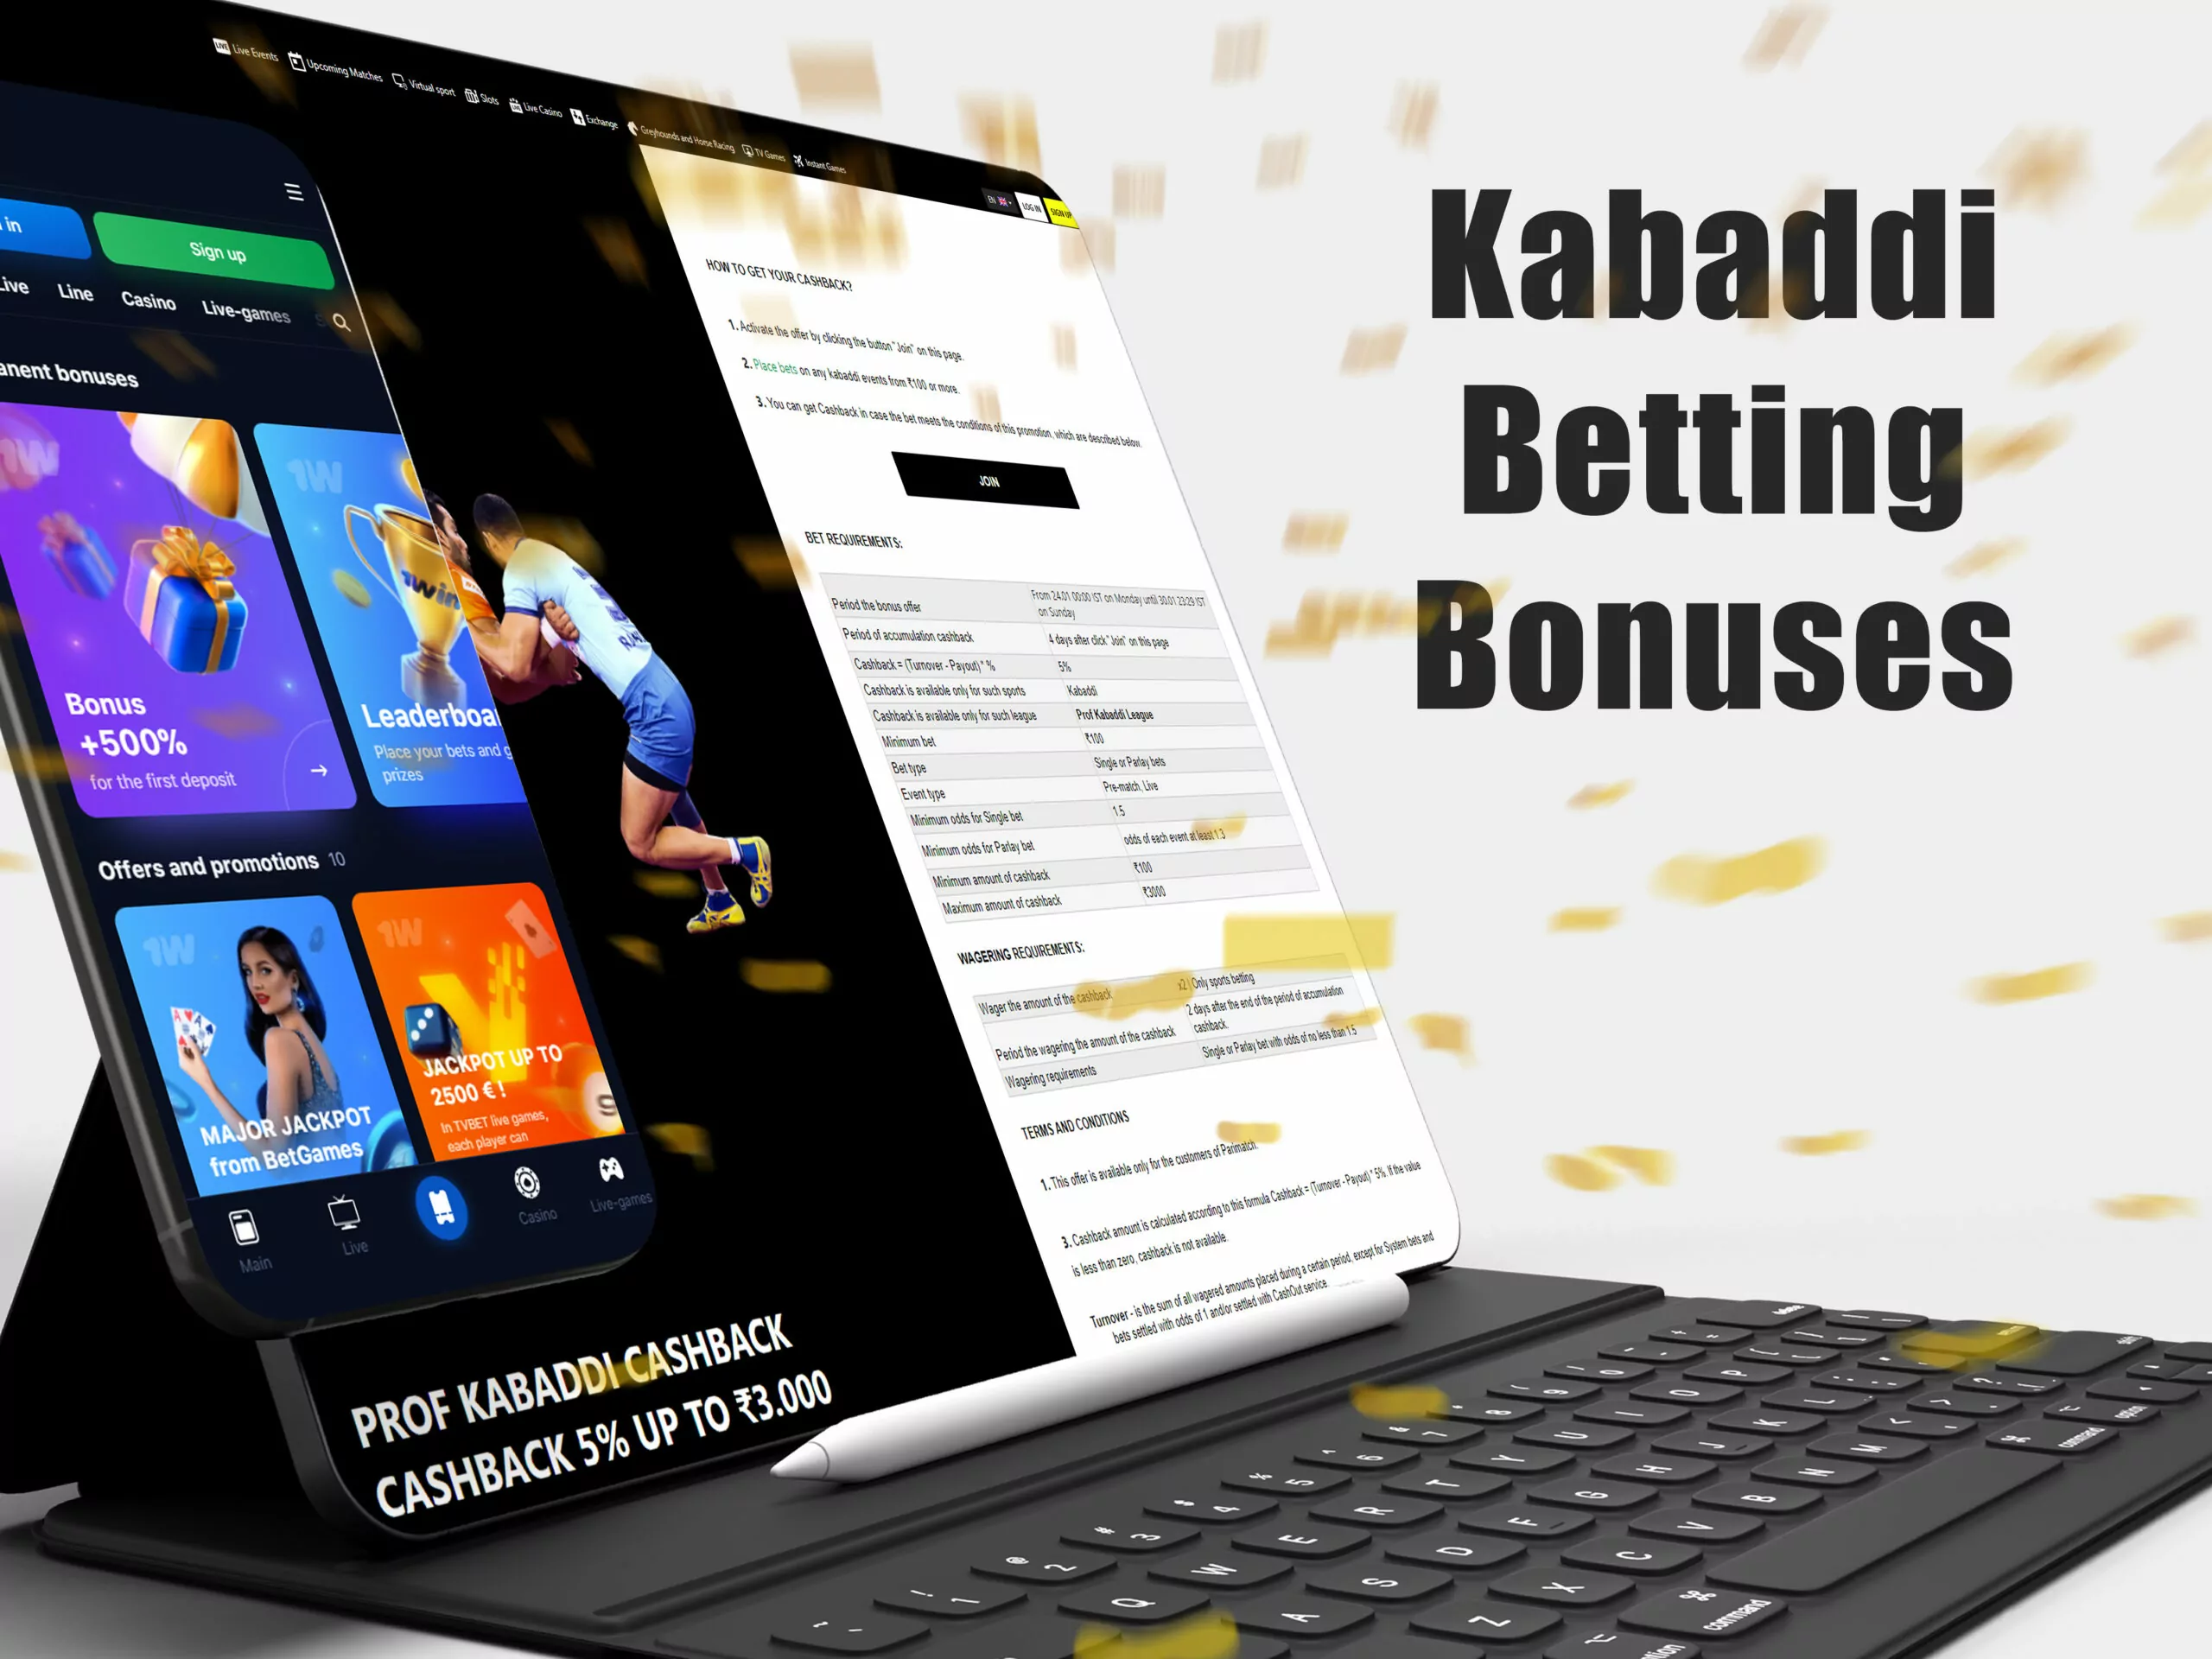 Kabaddi bookies provide thier customers with special bonuses after registration.